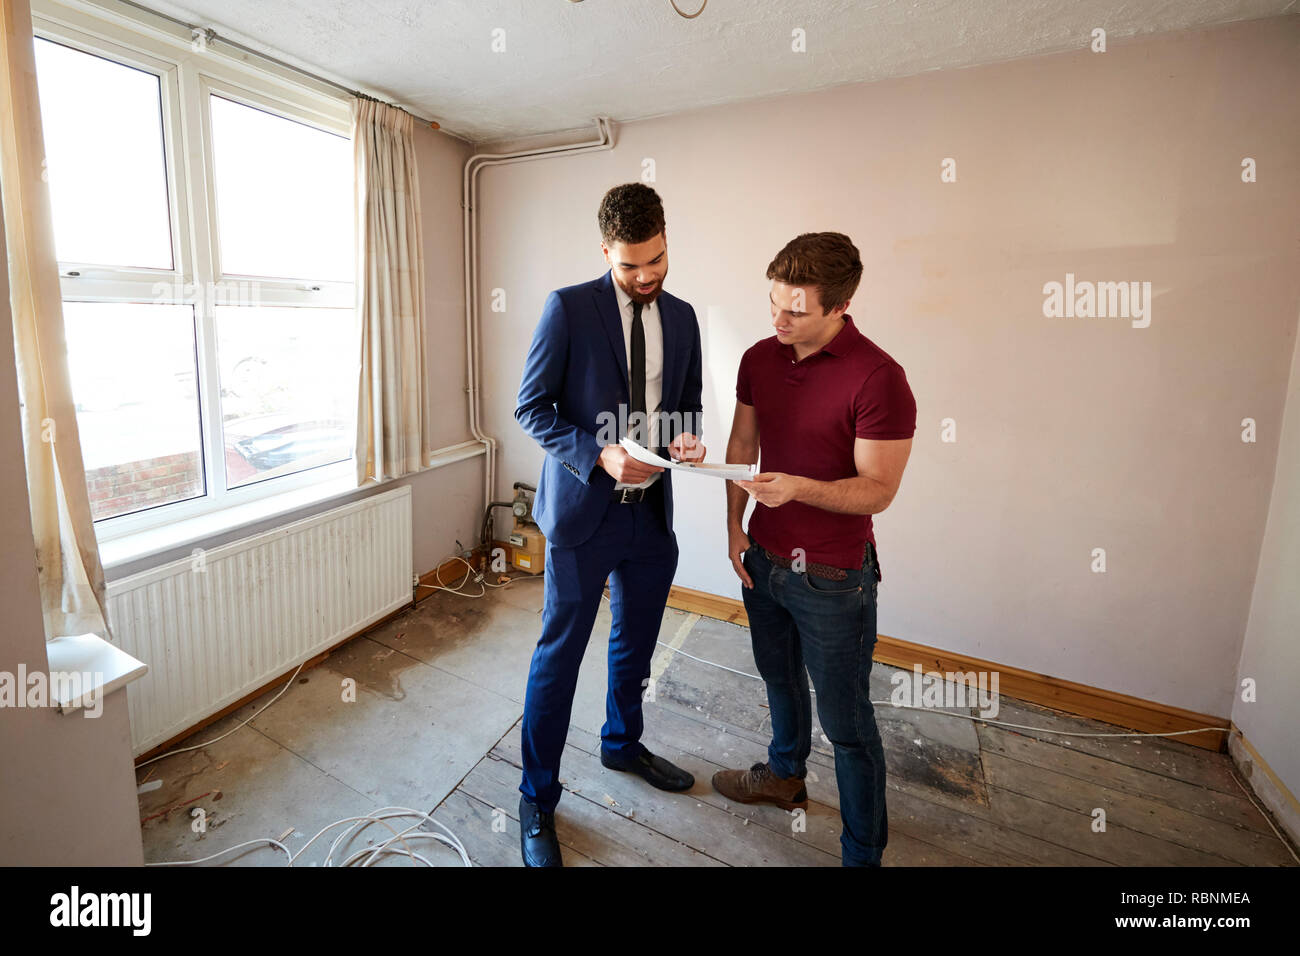 Male First Time Buyer Looking At House Survey With Realtor Stock Photo